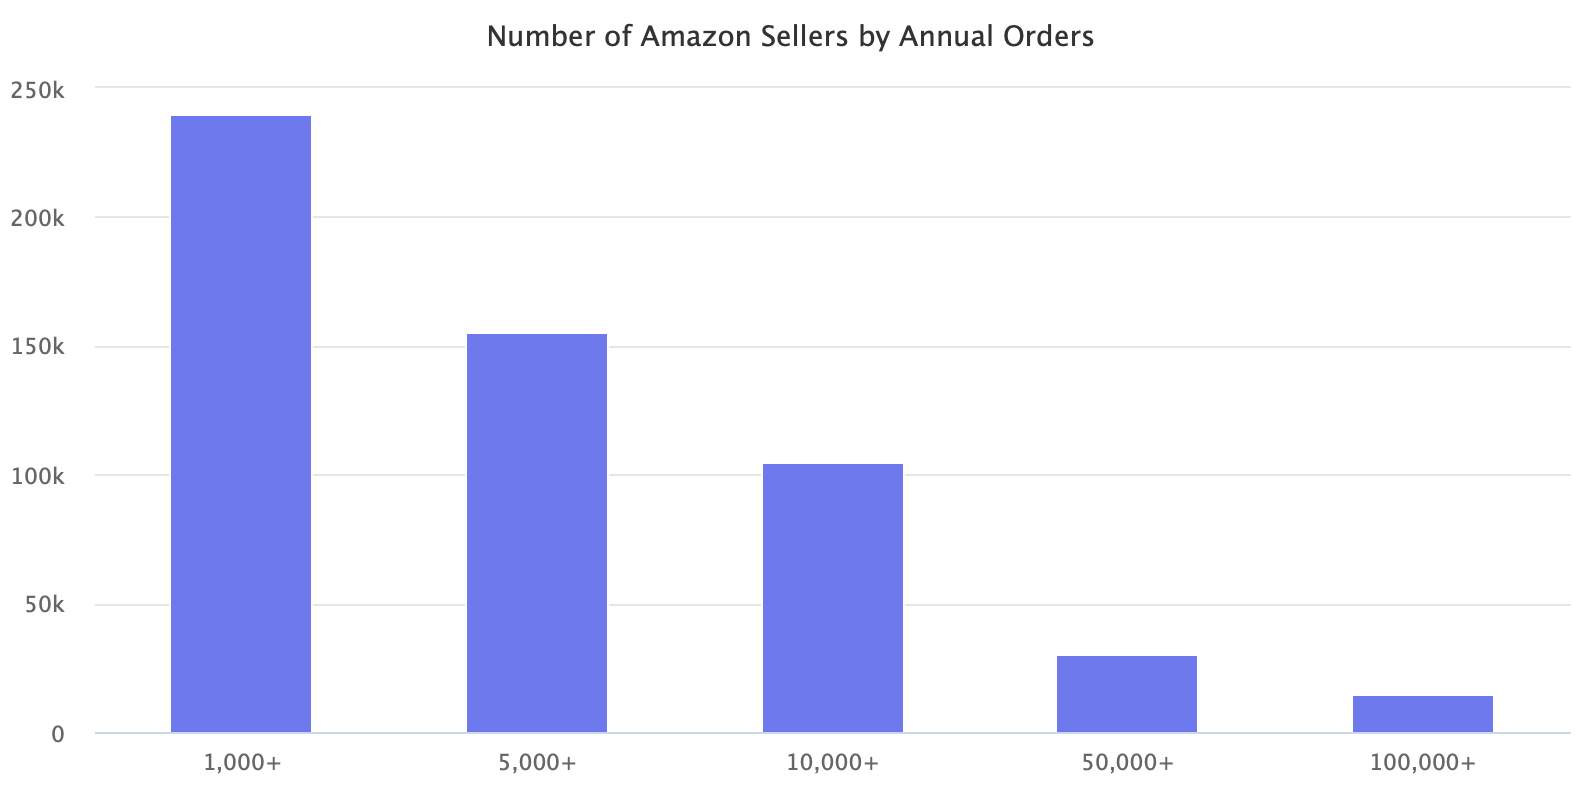 Number of Amazon Sellers by Annual Orders